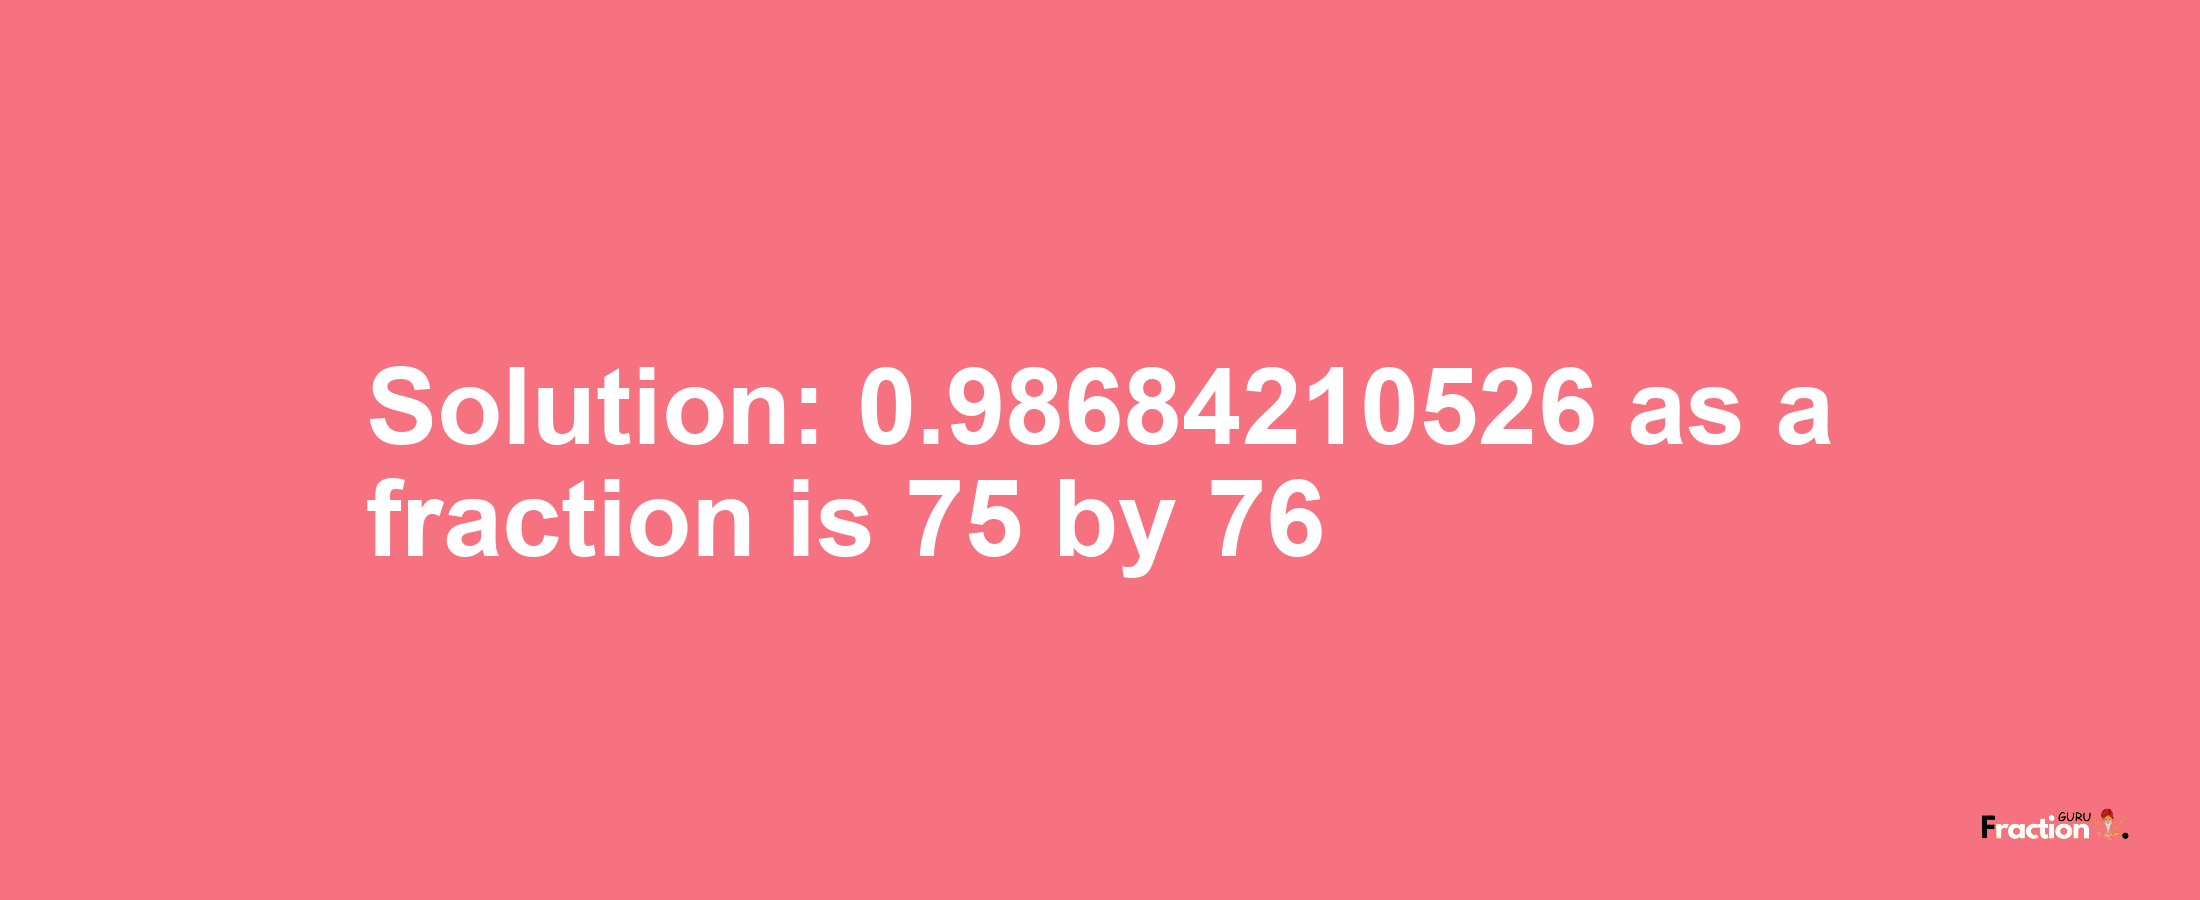 Solution:0.98684210526 as a fraction is 75/76